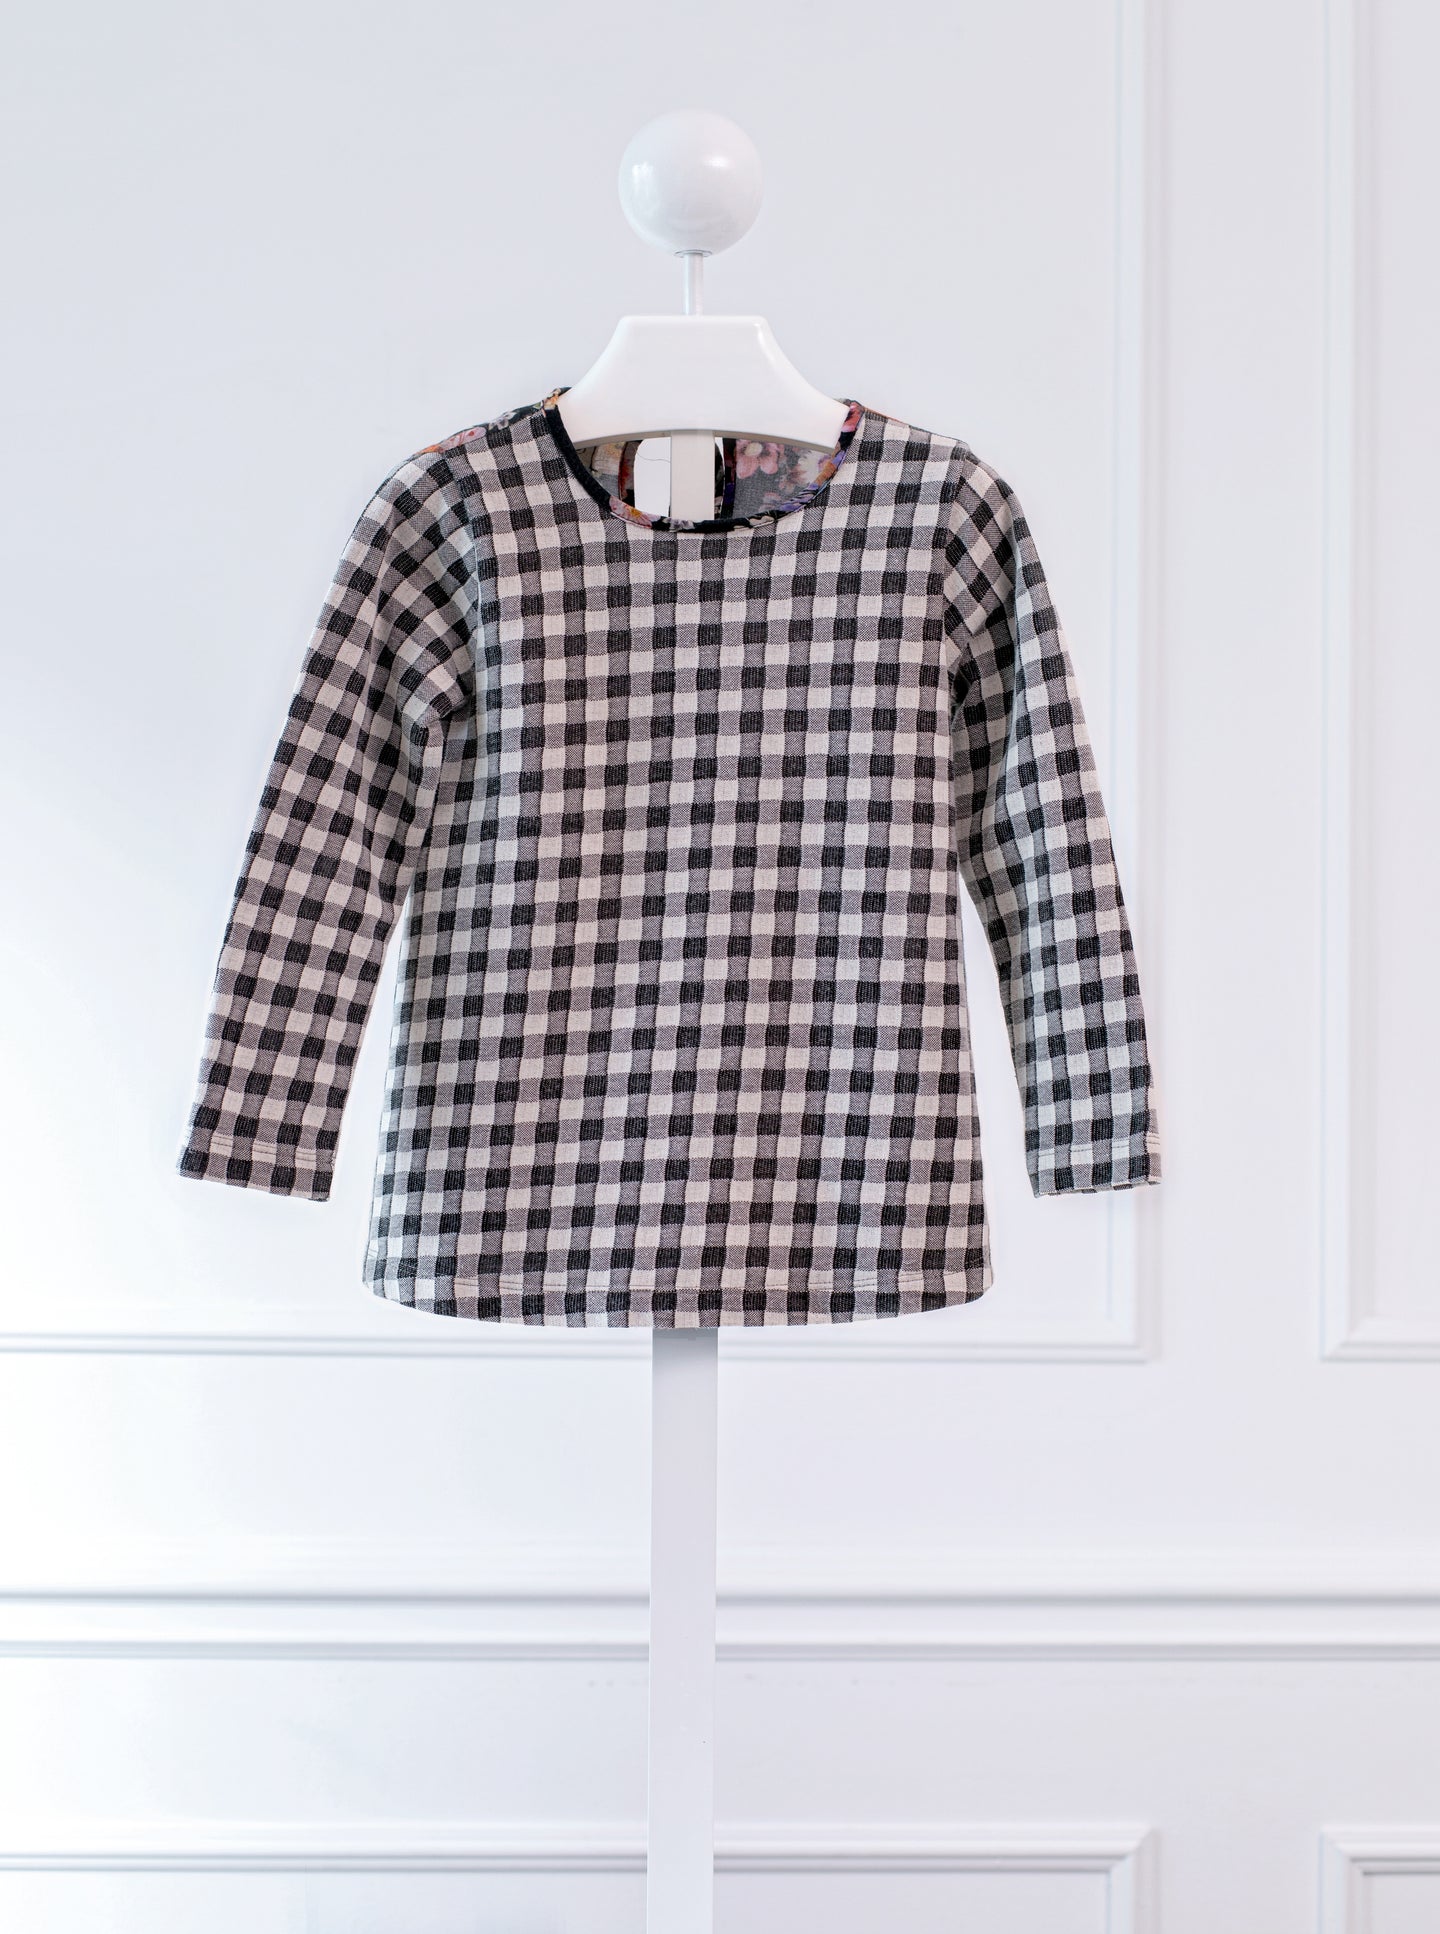 [4/5y] Olive by Sisco Checkered Floral Blouse - 2 sizes avail.